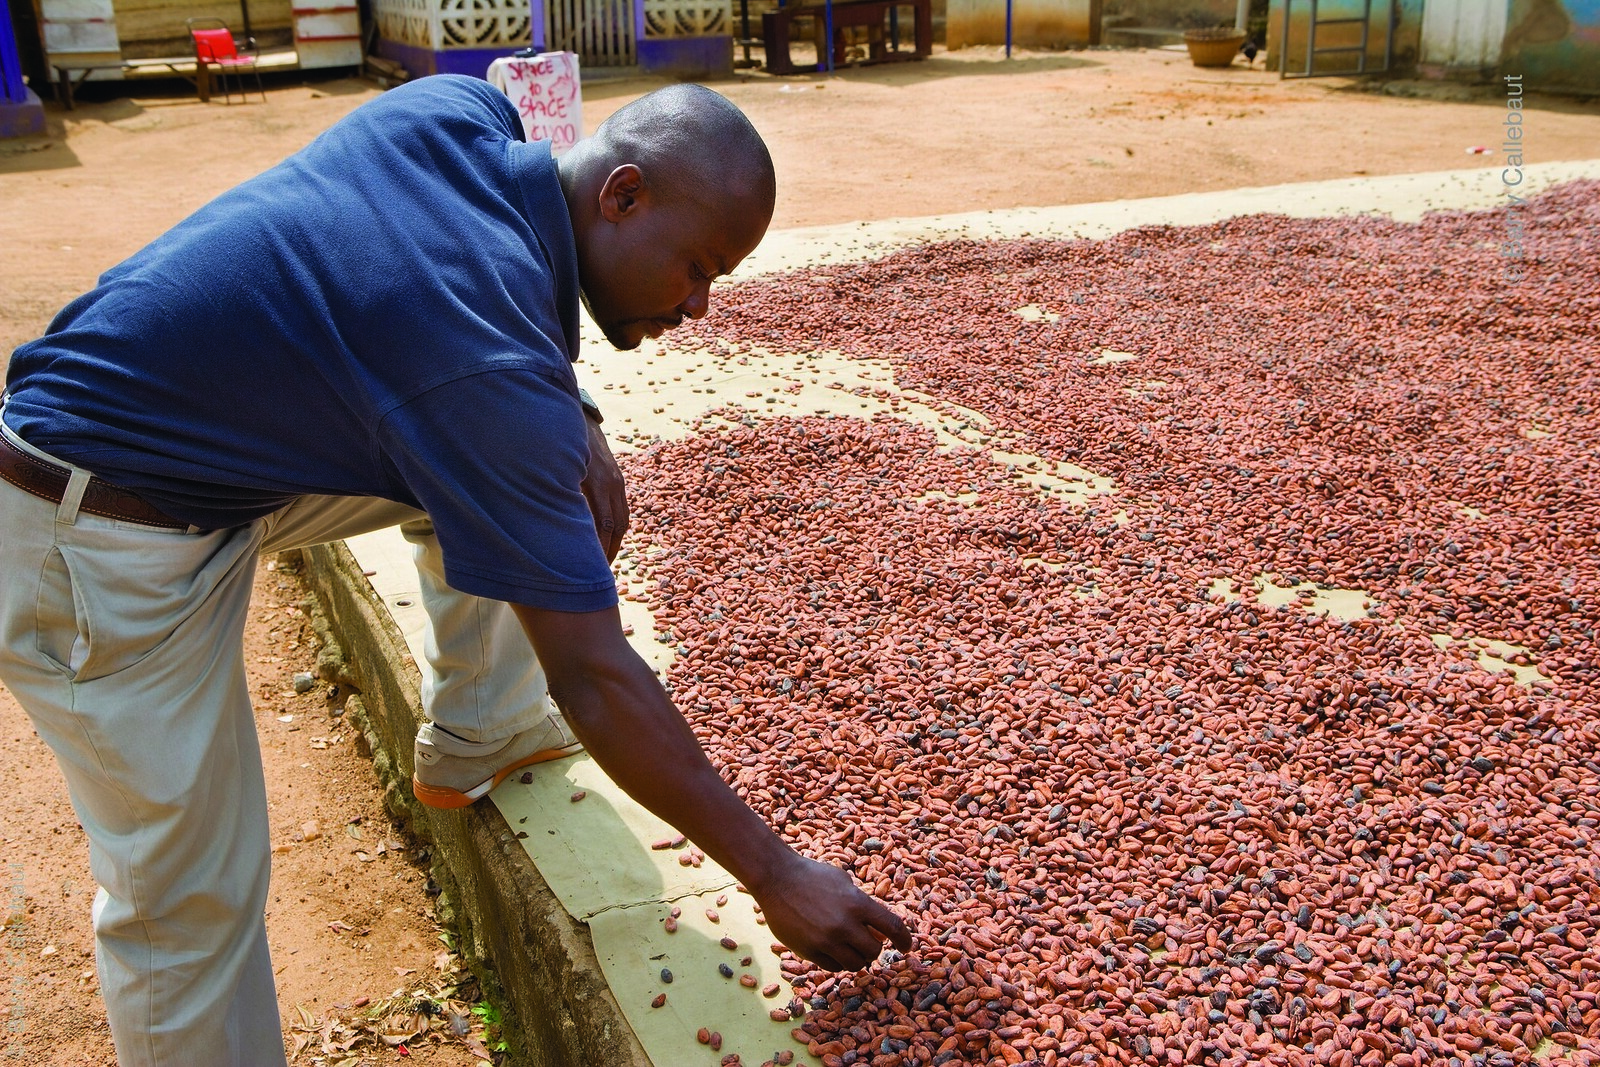 Drying cocoa beans